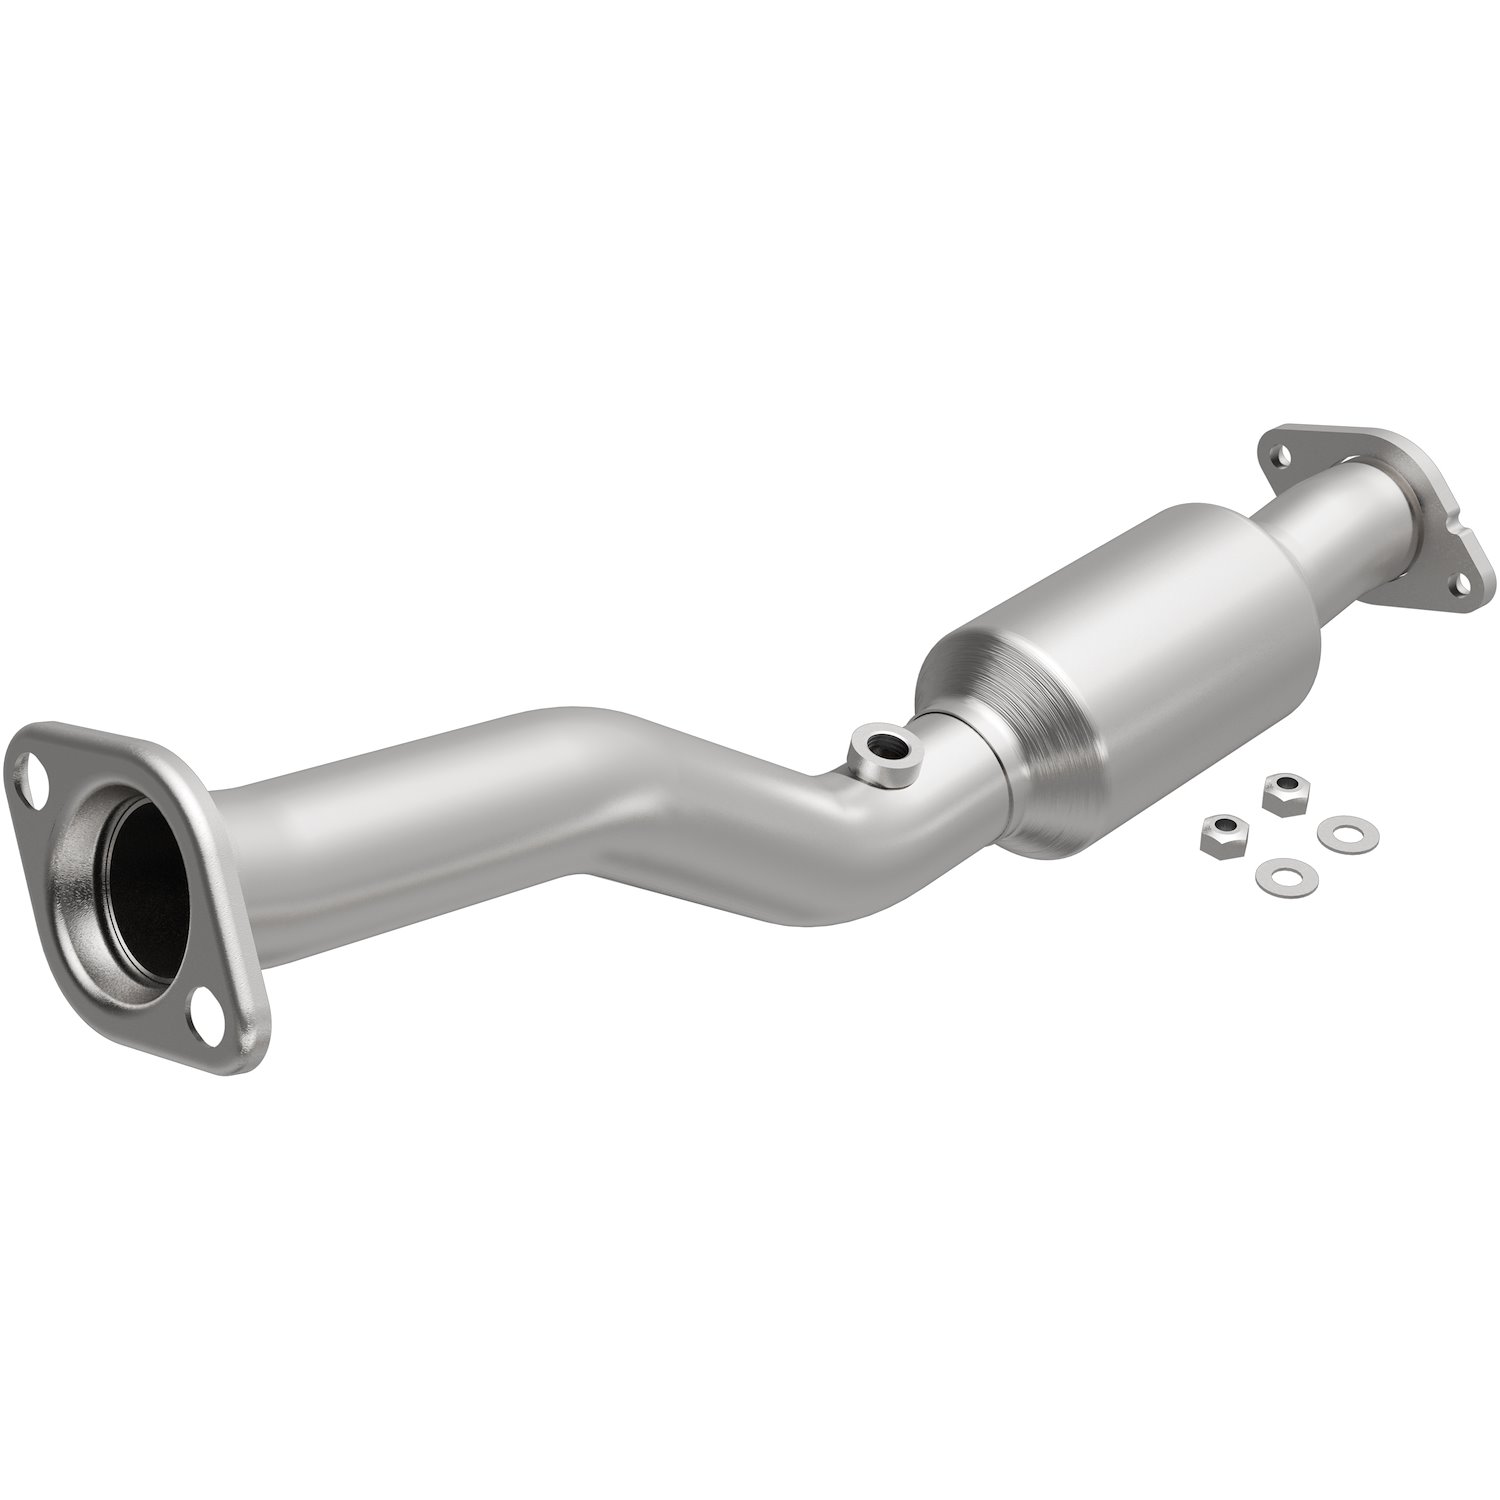 OEM Grade Federal / EPA Compliant Direct-Fit Catalytic Converter 52709